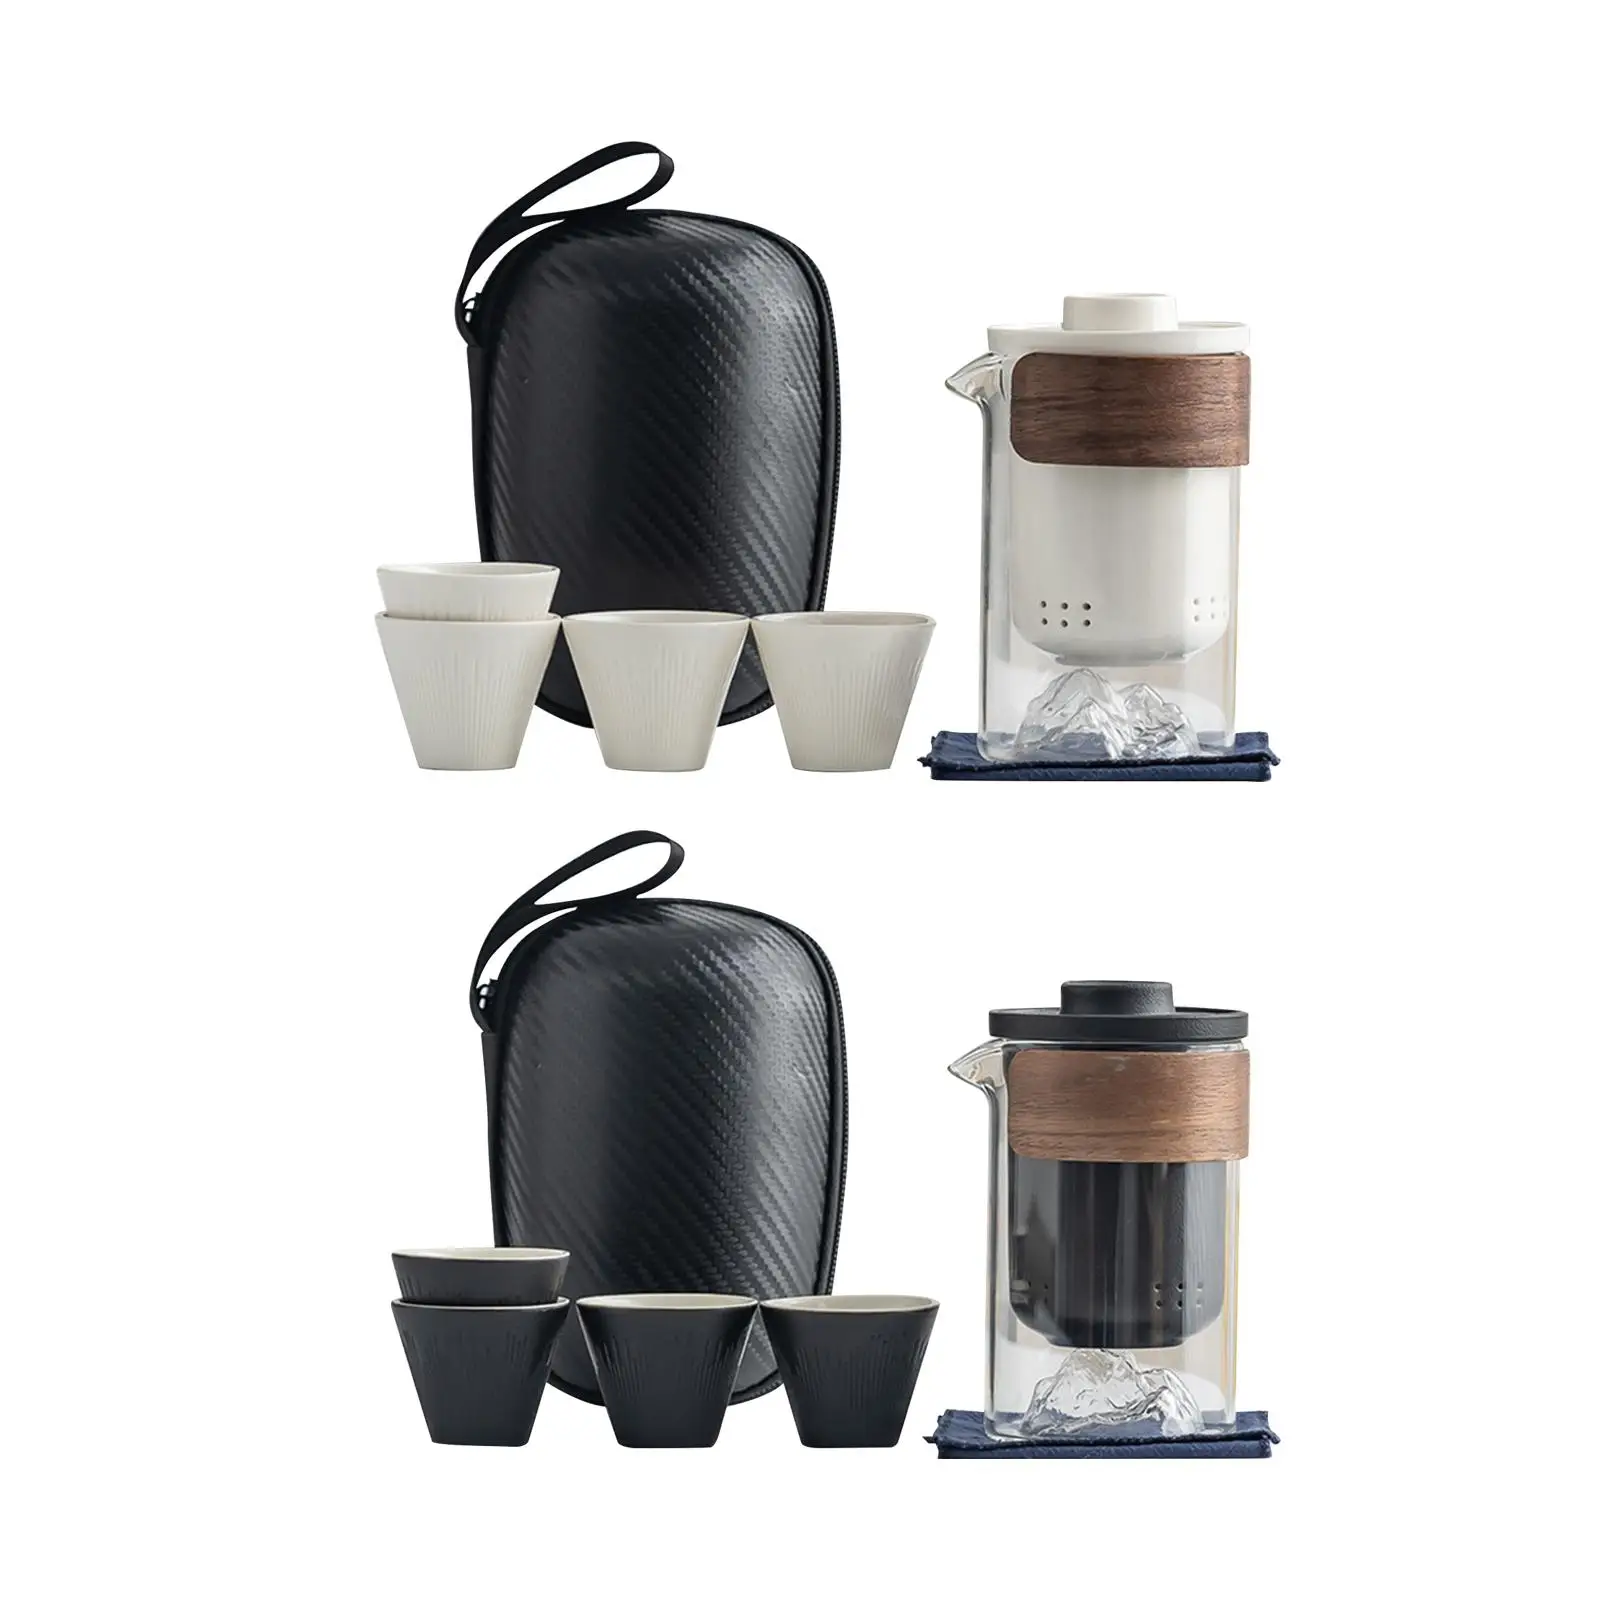 Travel Tea Set Glass Teapot Infuser Ceramic Tea Cup with Case Teapot and Cup Set for camping Climbing Friends